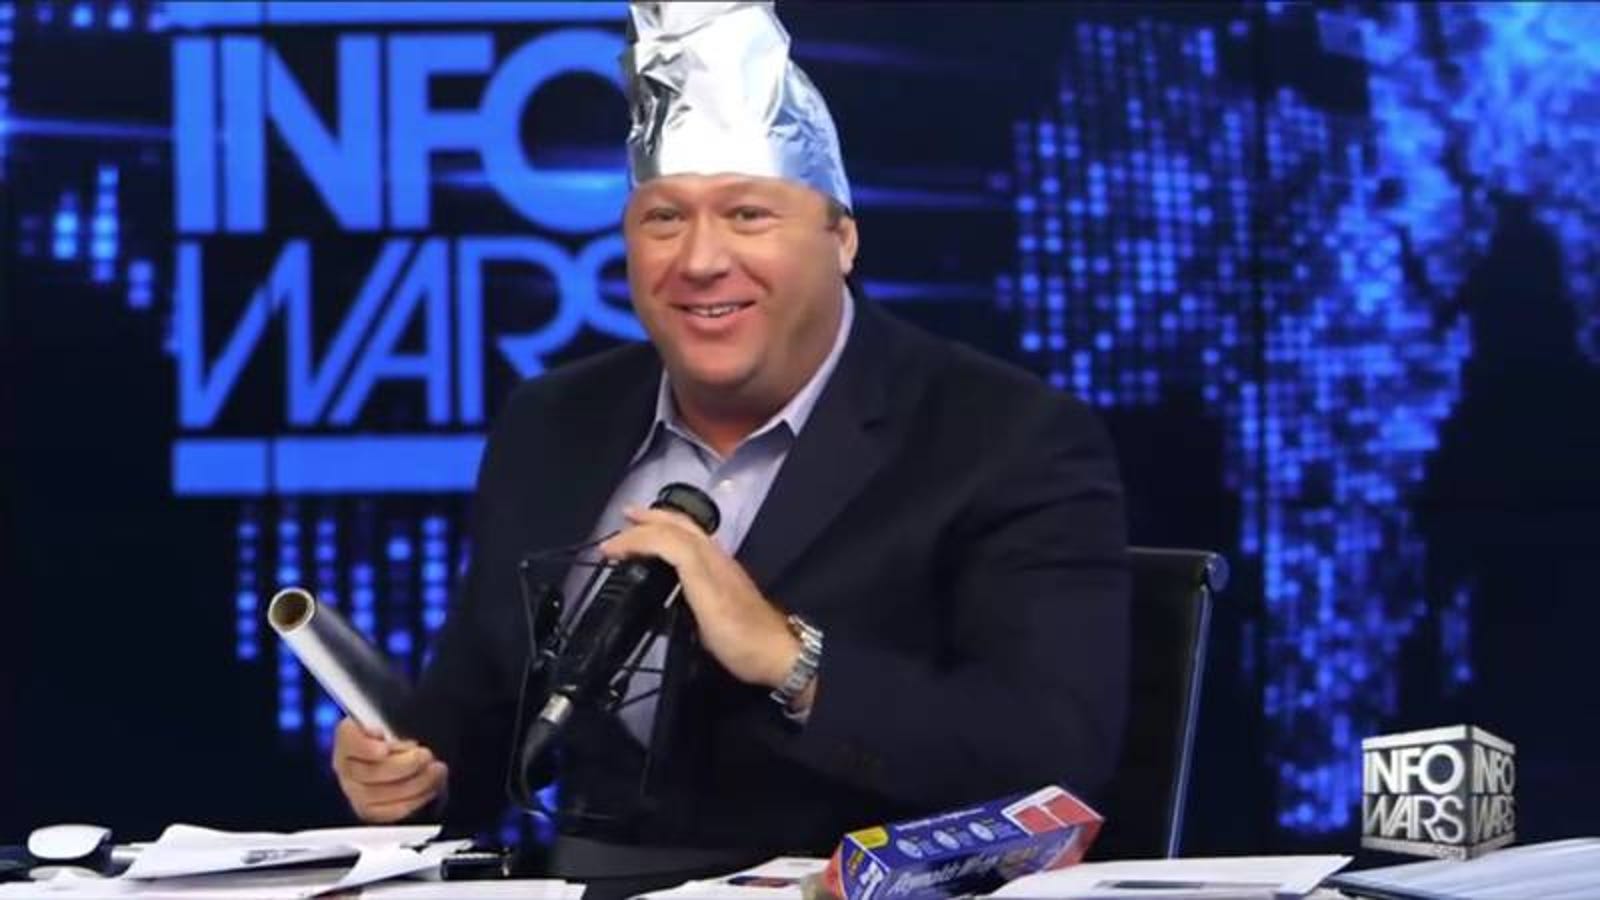 Alex Jones brags that he’s a “number one meme” during custody trial